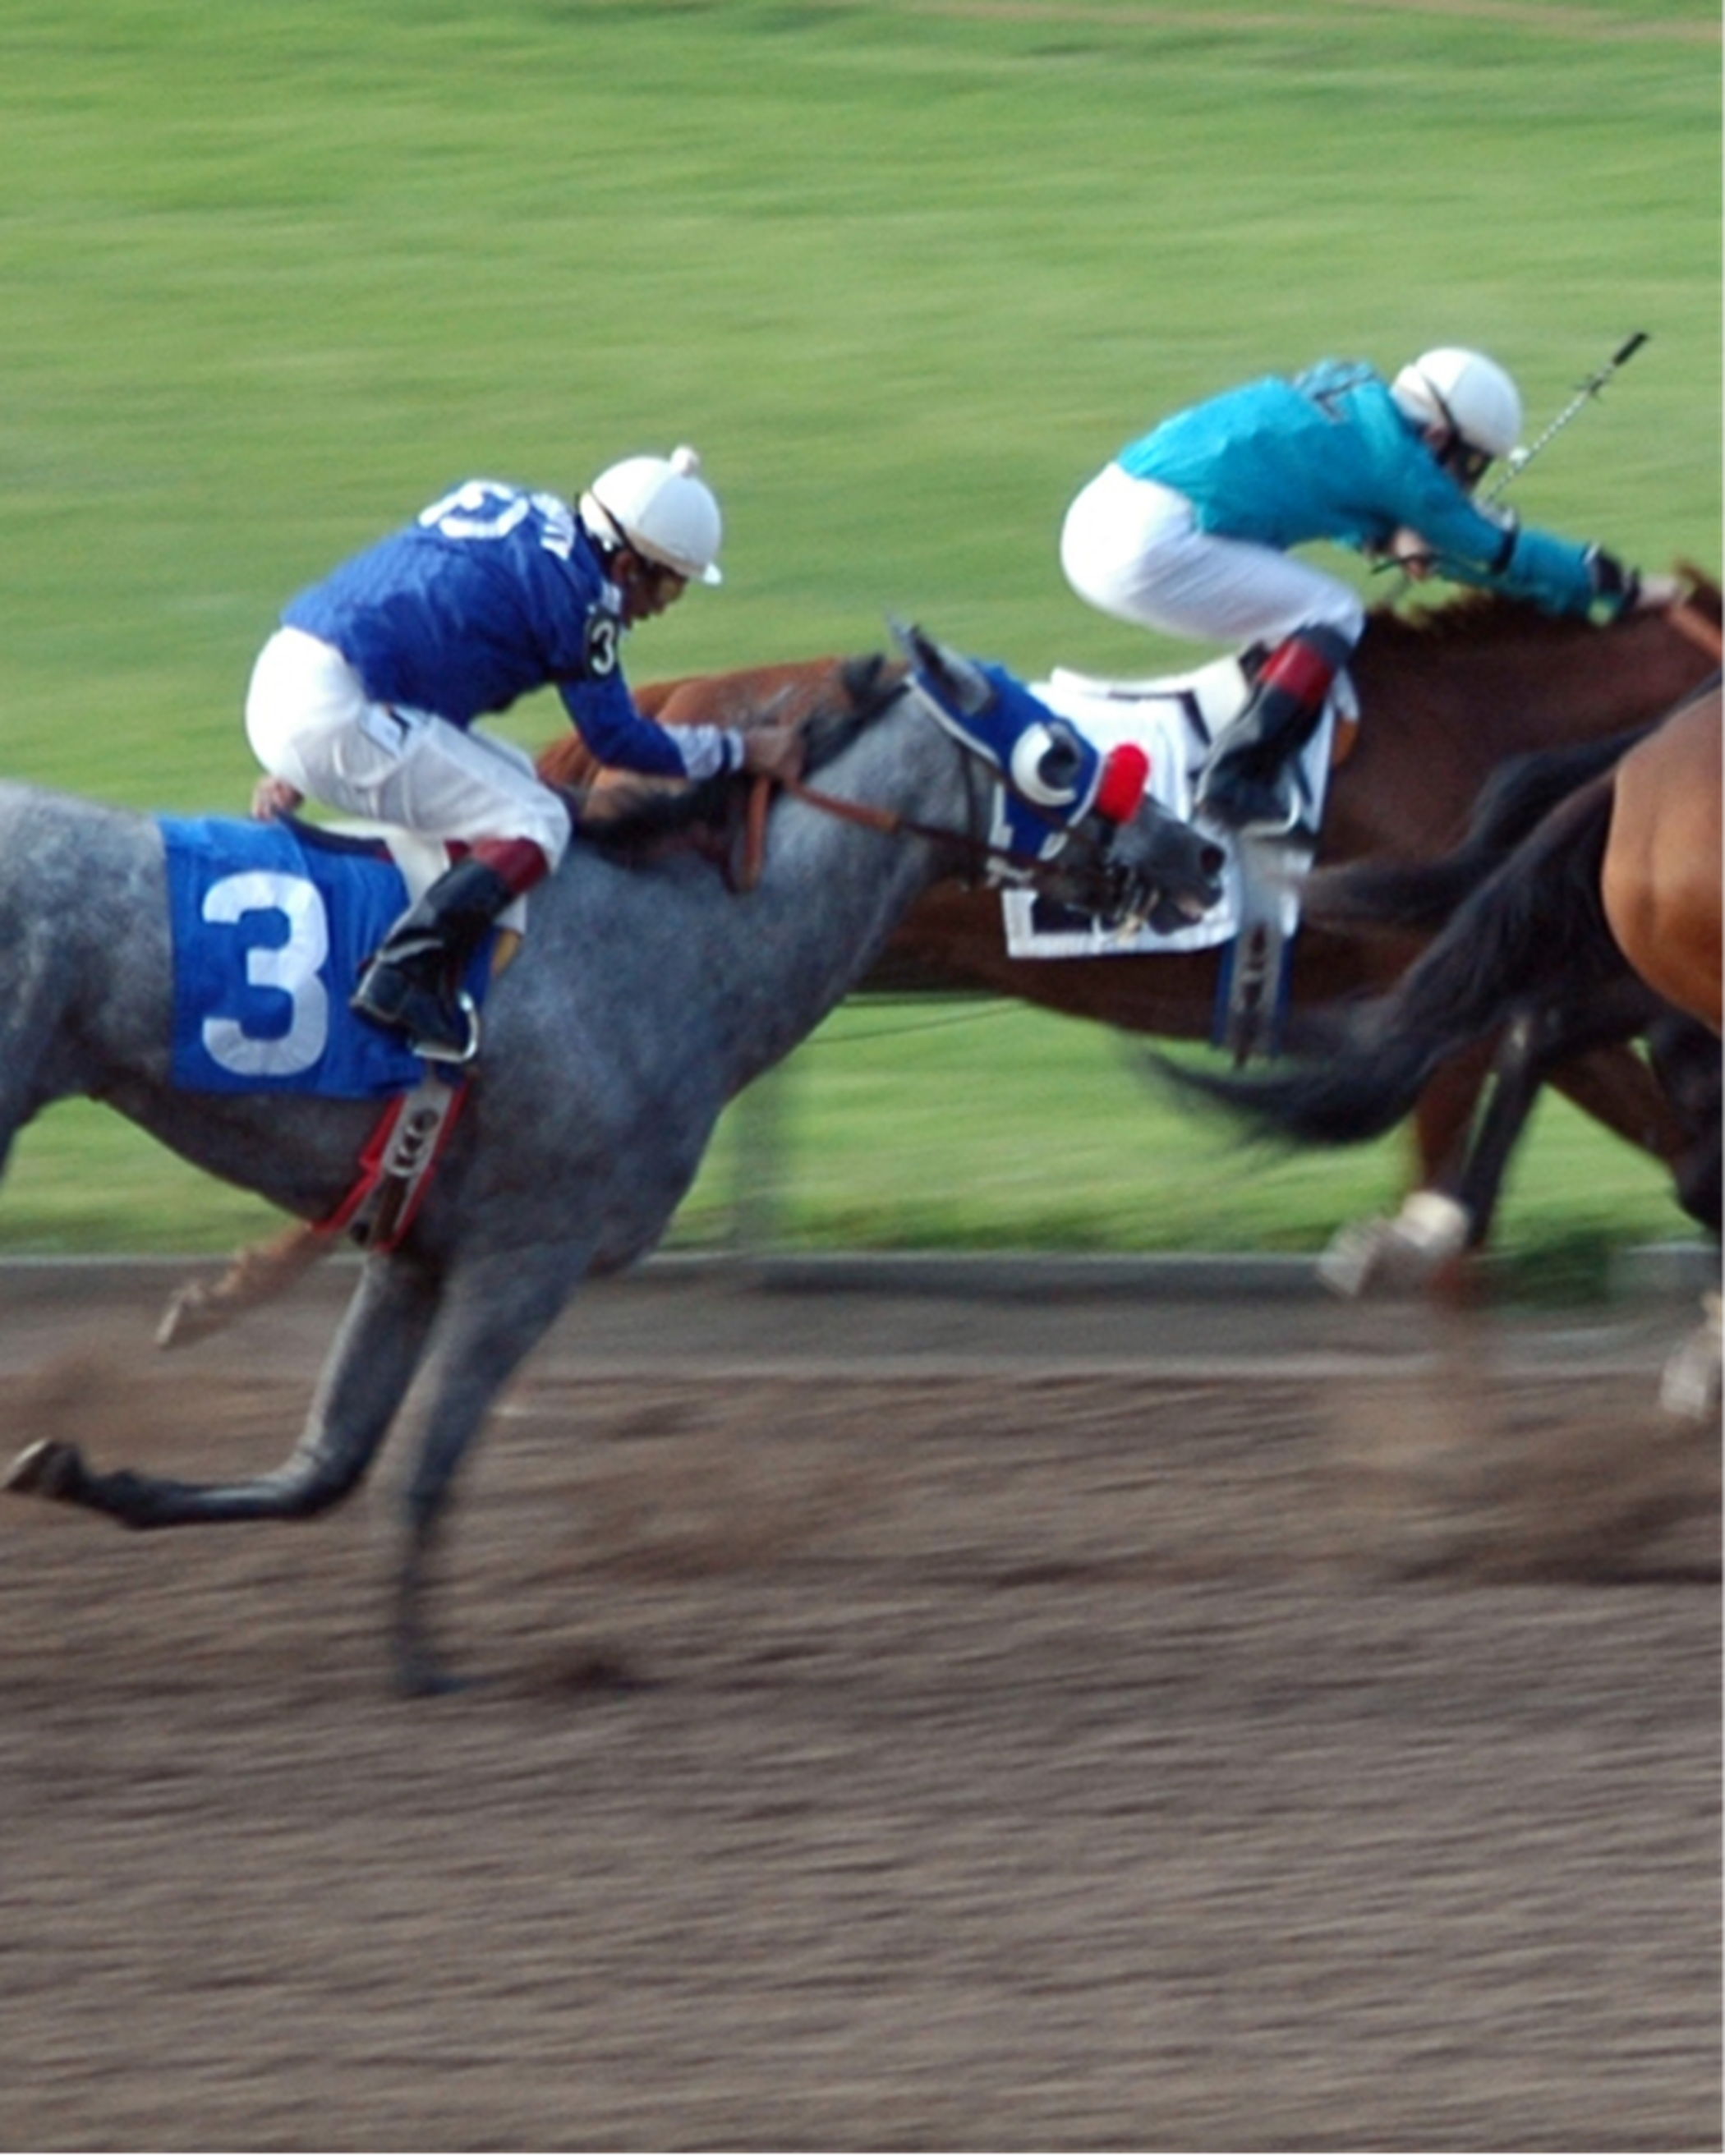 Stock image of horse racing